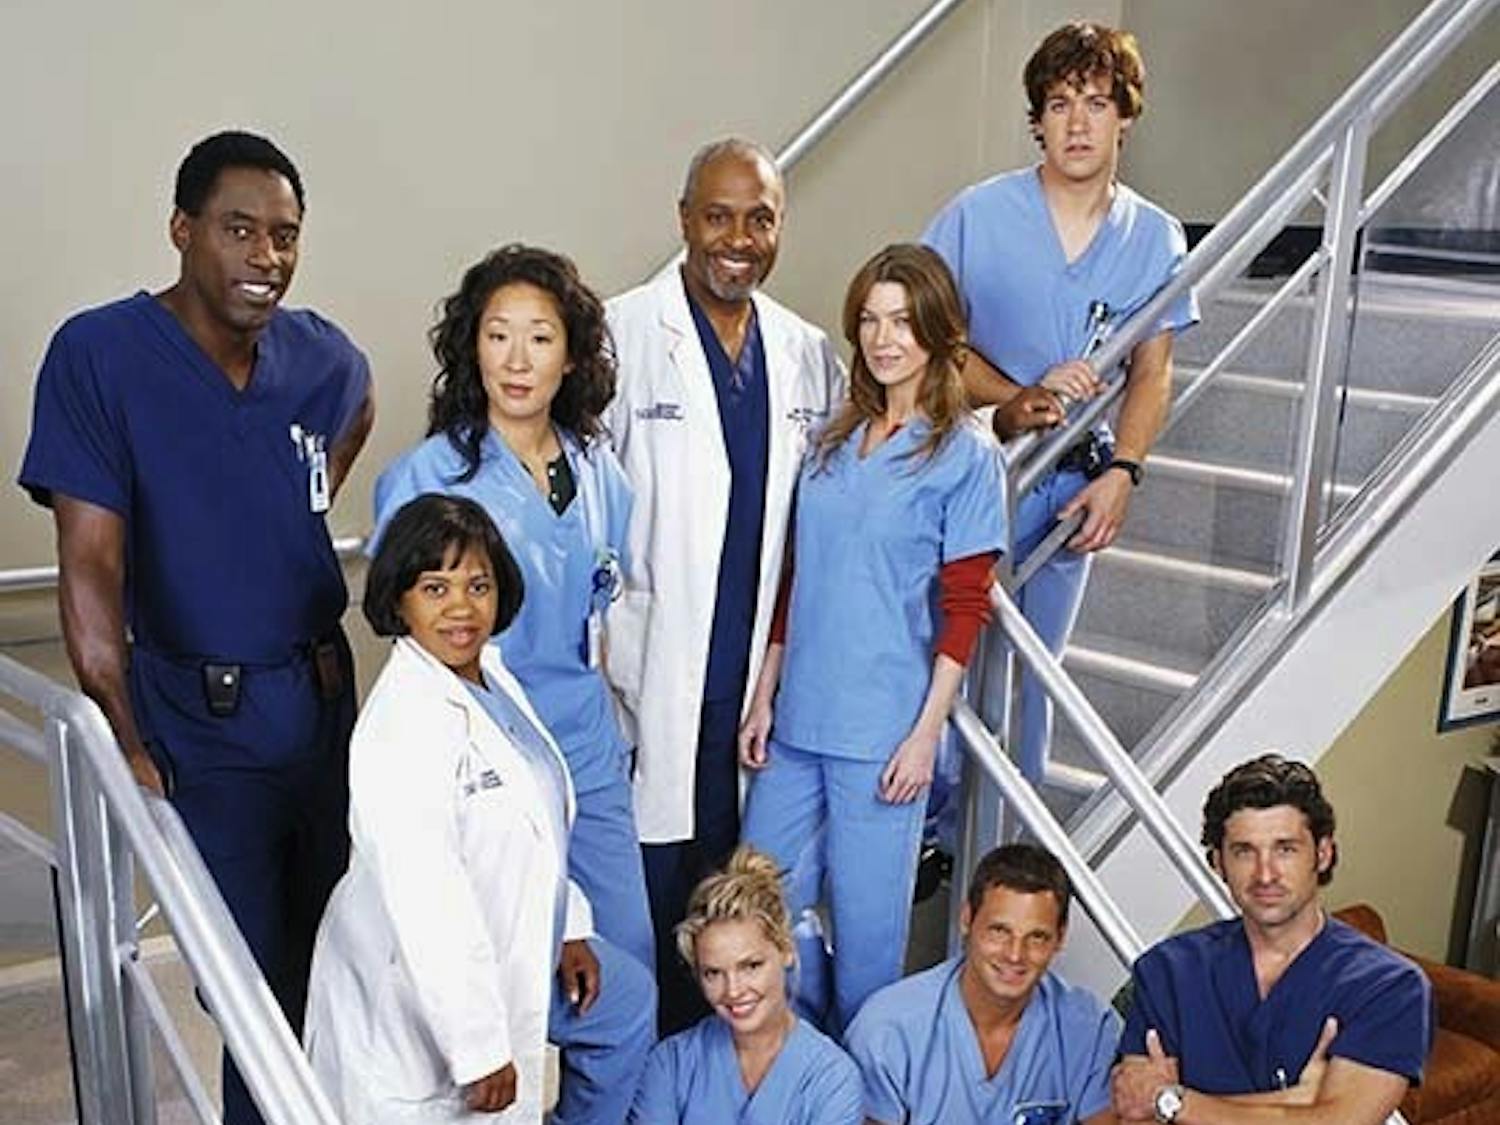 The cast of ABC’s “Grey’s Anatomy.” "Grey’s Anatomy" is one of the many shows on TV today that includes portrayals of mental disorders in a way that trivializes them and feeds into stereotypes.